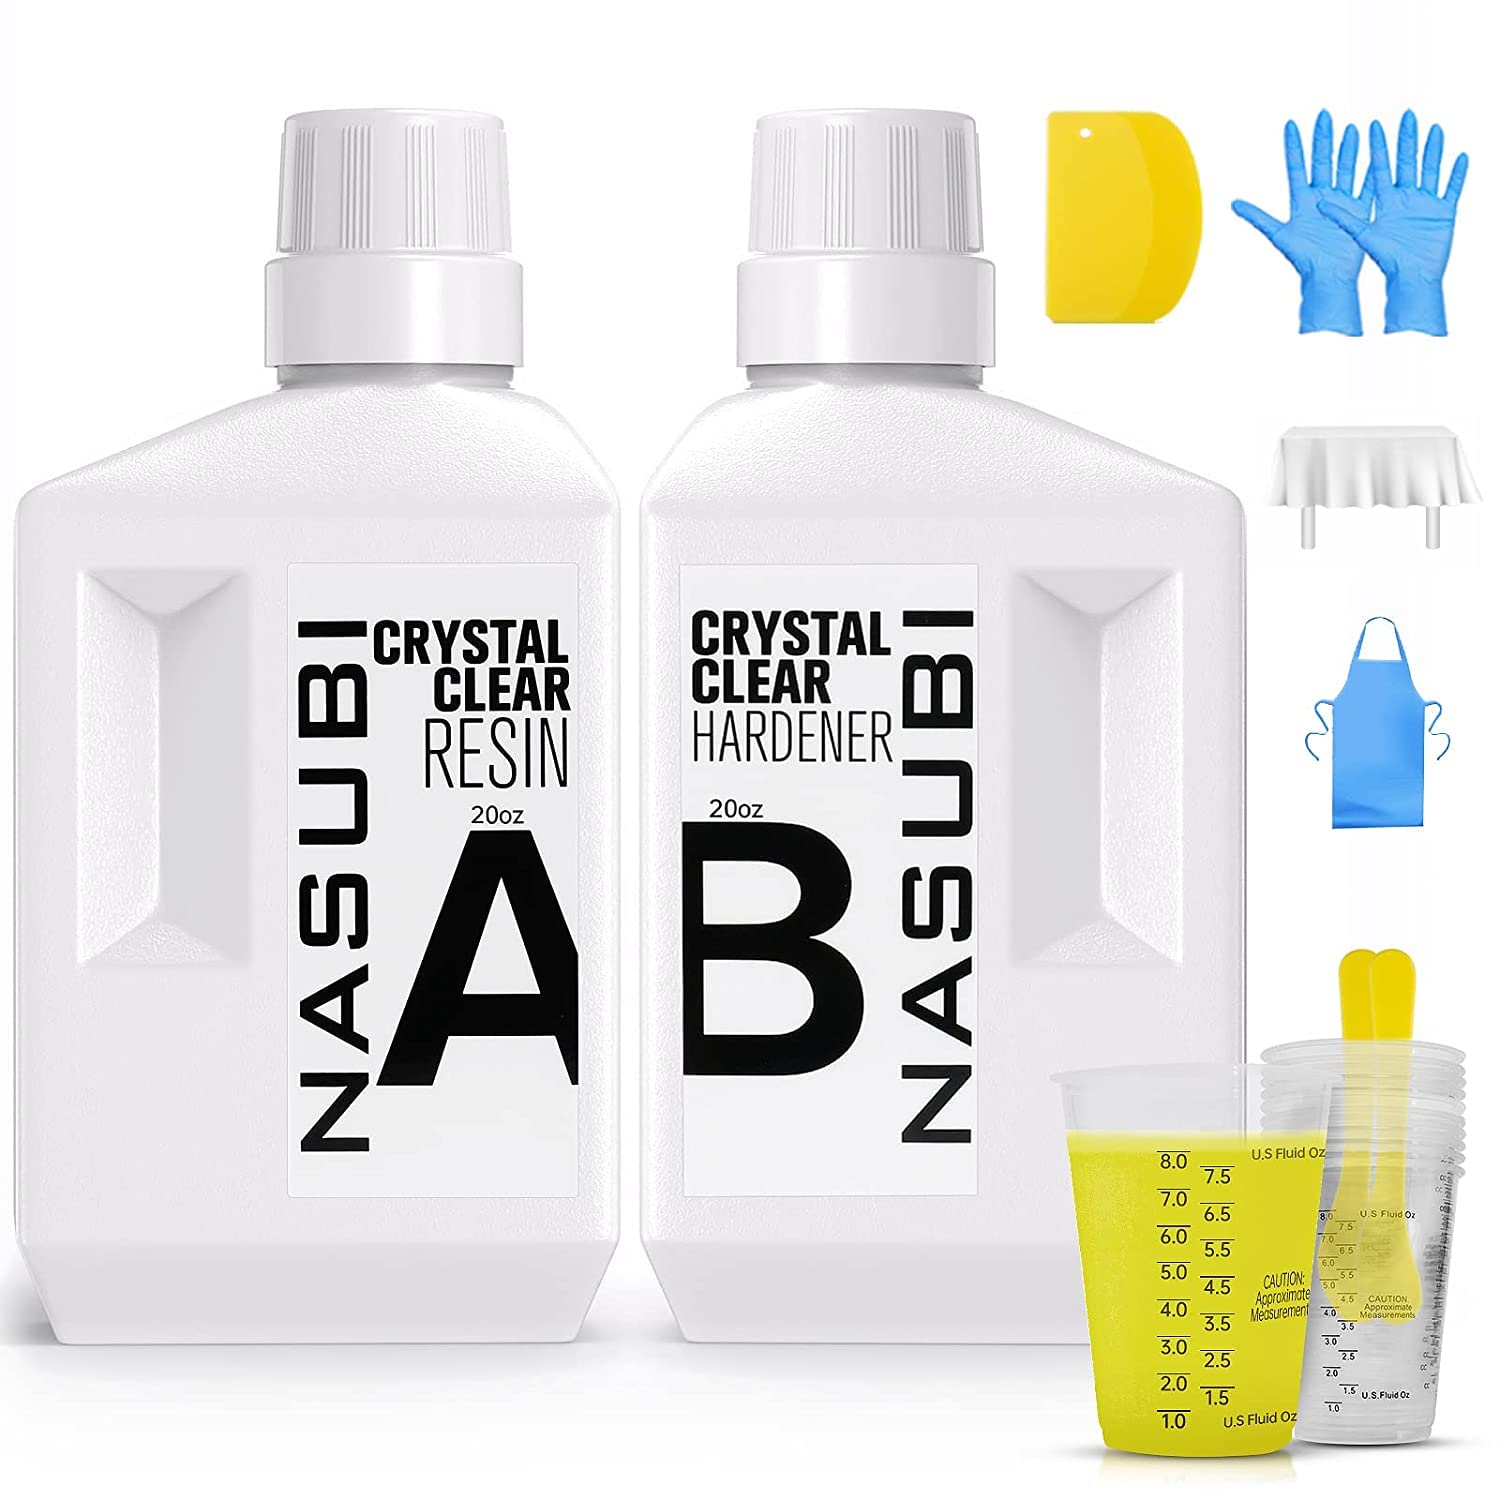 Craft Resin 2 Gallon Epoxy Resin Kit - Crystal Clear Epoxy Resin Kit &  Hardener for DIY Art, Mold Casting, Wood, Jewelry Making, Coasters, Table  Top - Food Safe, Heat & UV